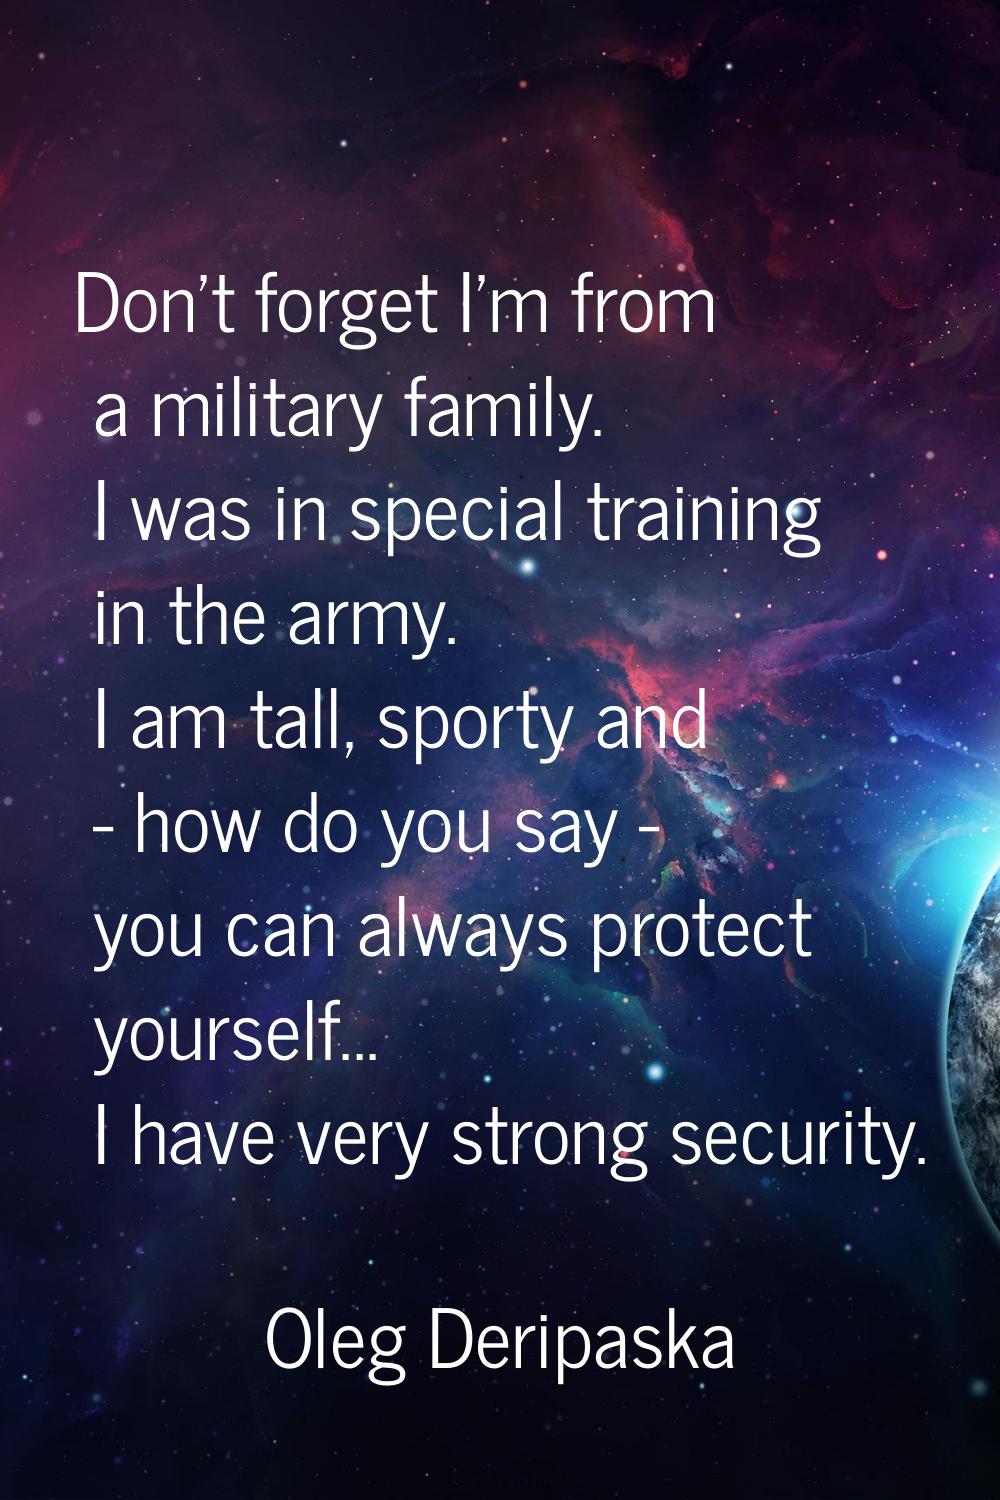 Don't forget I'm from a military family. I was in special training in the army. I am tall, sporty a